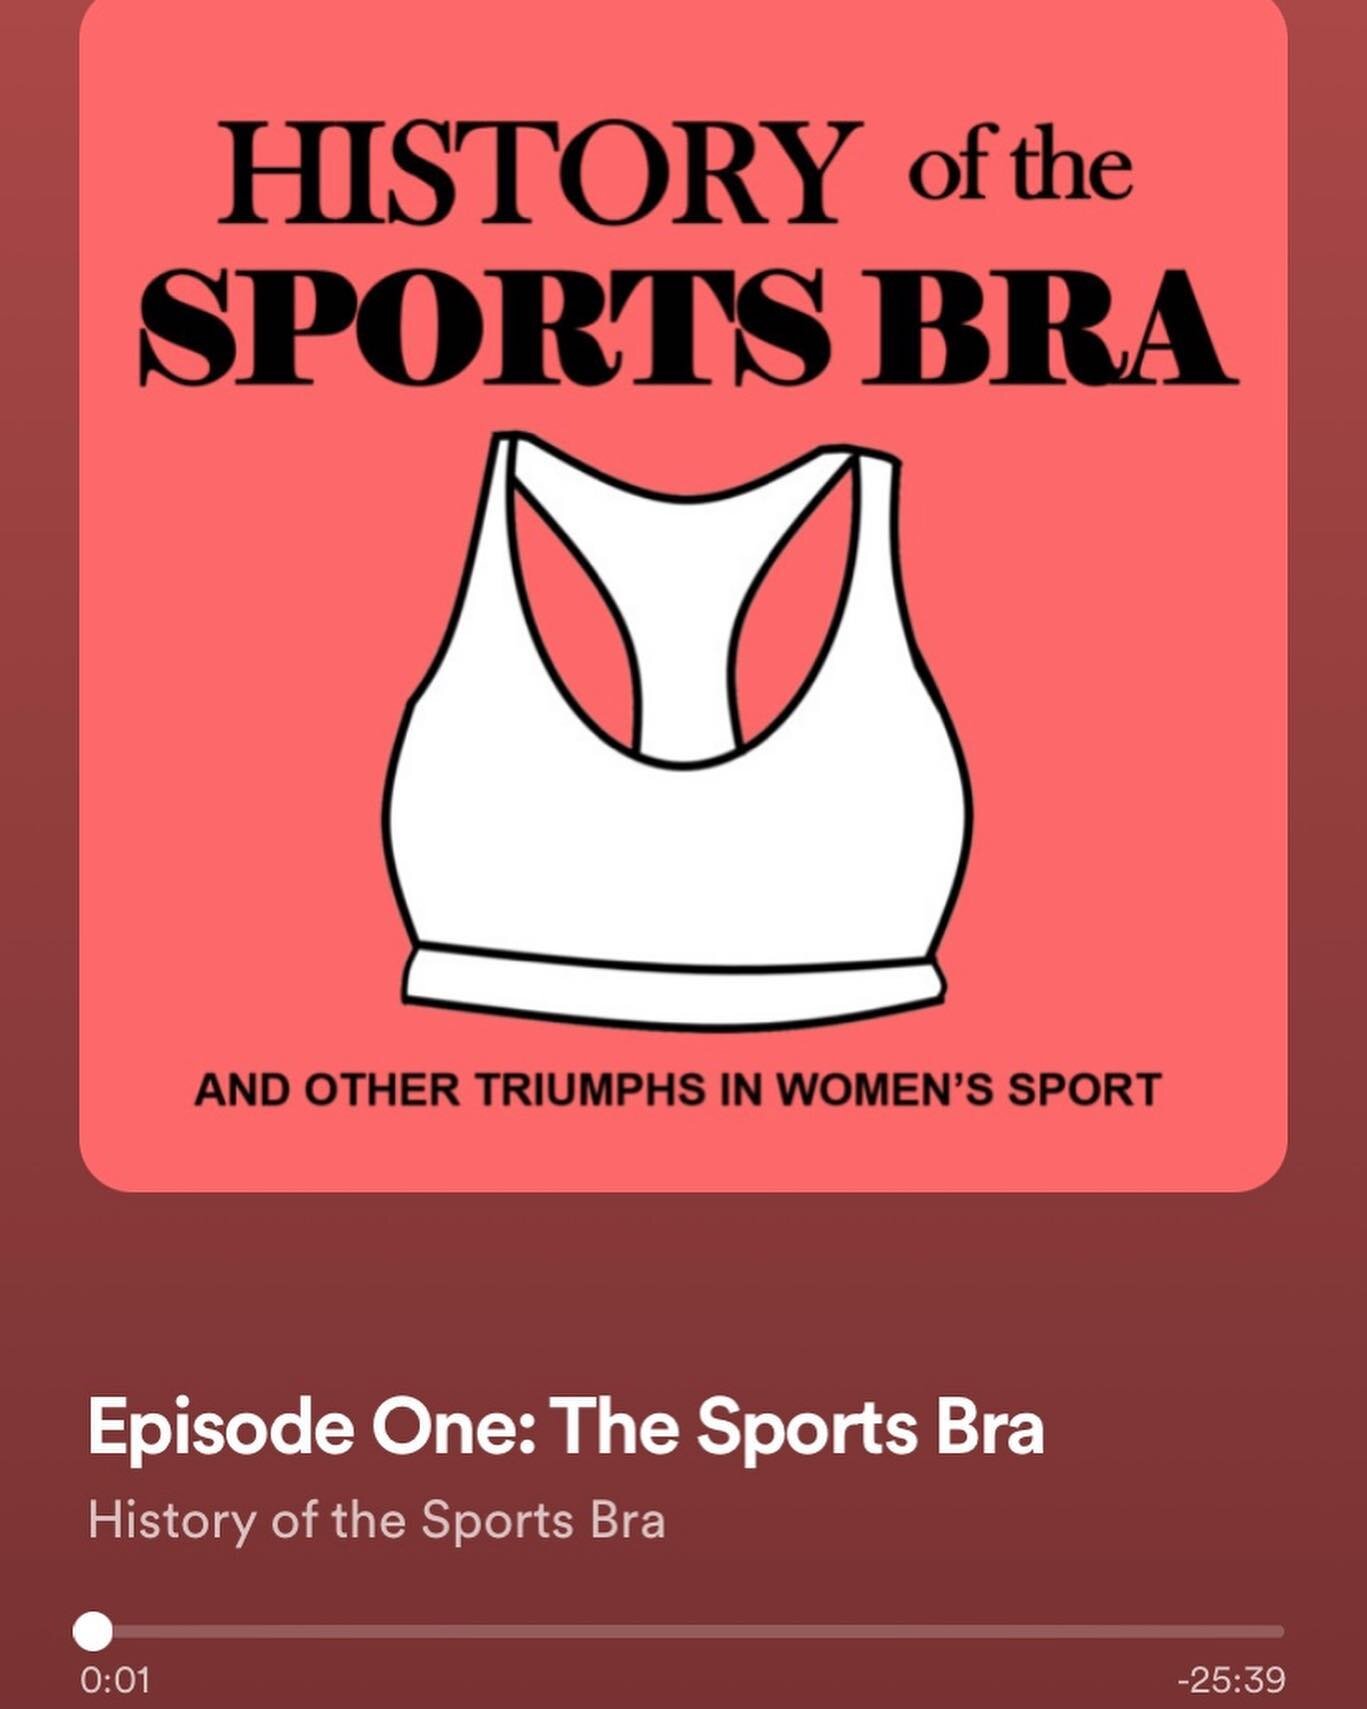 WOW!! HOTSB already has 5 episodes  dedicated to women&rsquo;s sports 🏃&zwj;♀️👊 with more on the way. 

If you haven&rsquo;t, hit that follow button on insta to keep up with the latest from HOTSB. Make sure to subscribe wherever you may get your po